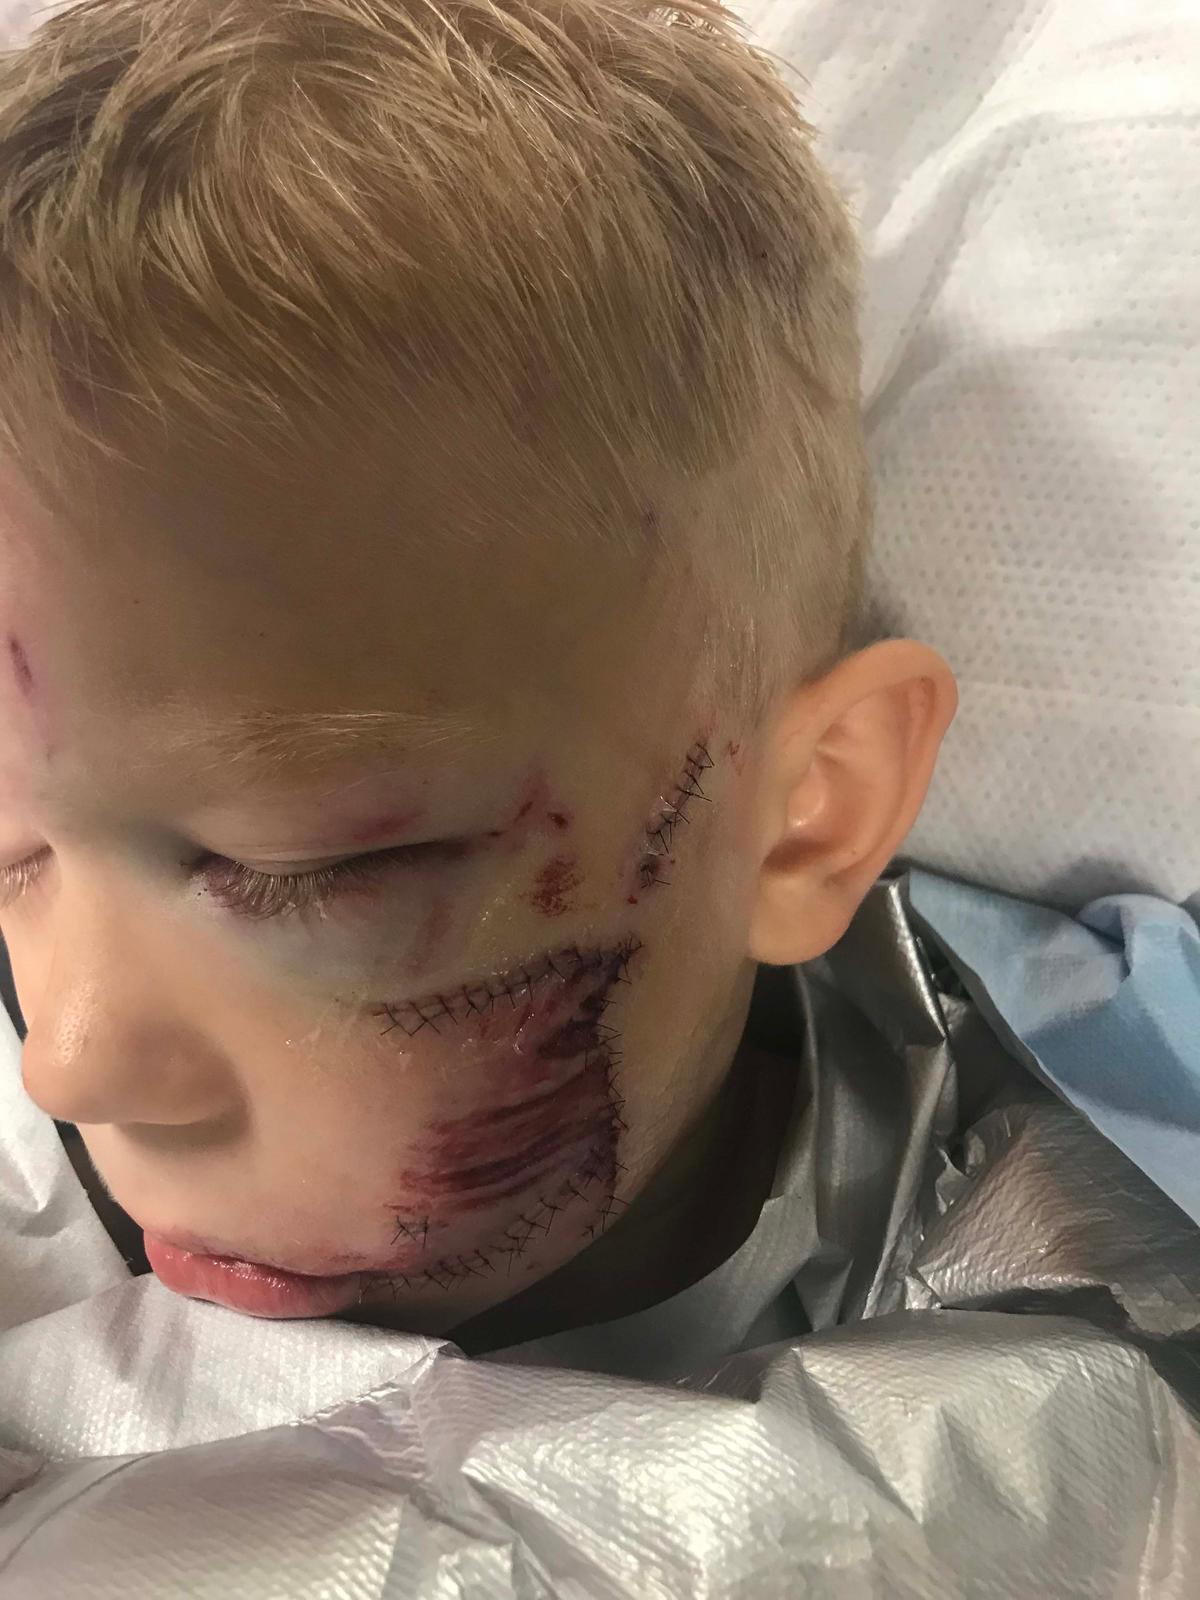 “I just finished visiting with Bridger at his home,” Bridger's aunt wrote on Instagram. “His wounds are looking so much better! He's in great spirits, and his awesome personality is intact." (Caters News)